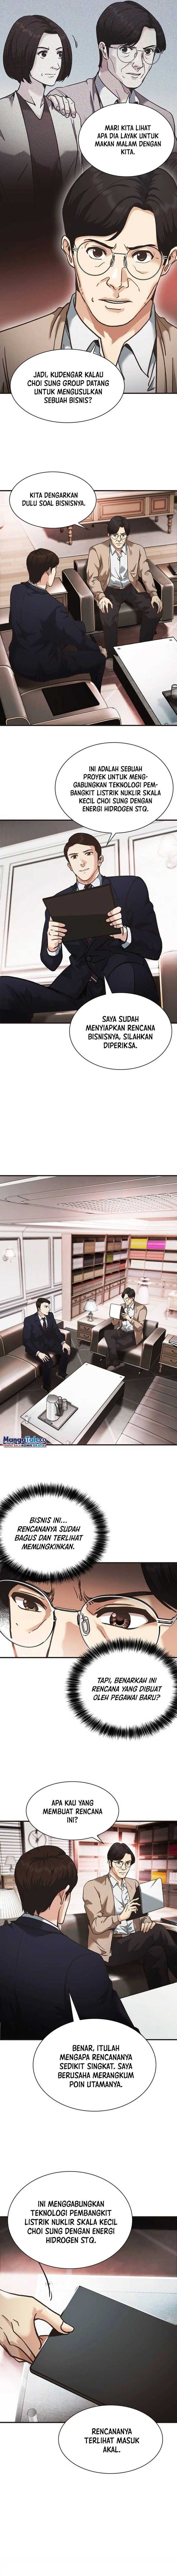 Chairman Kang, The New Employee Chapter 39